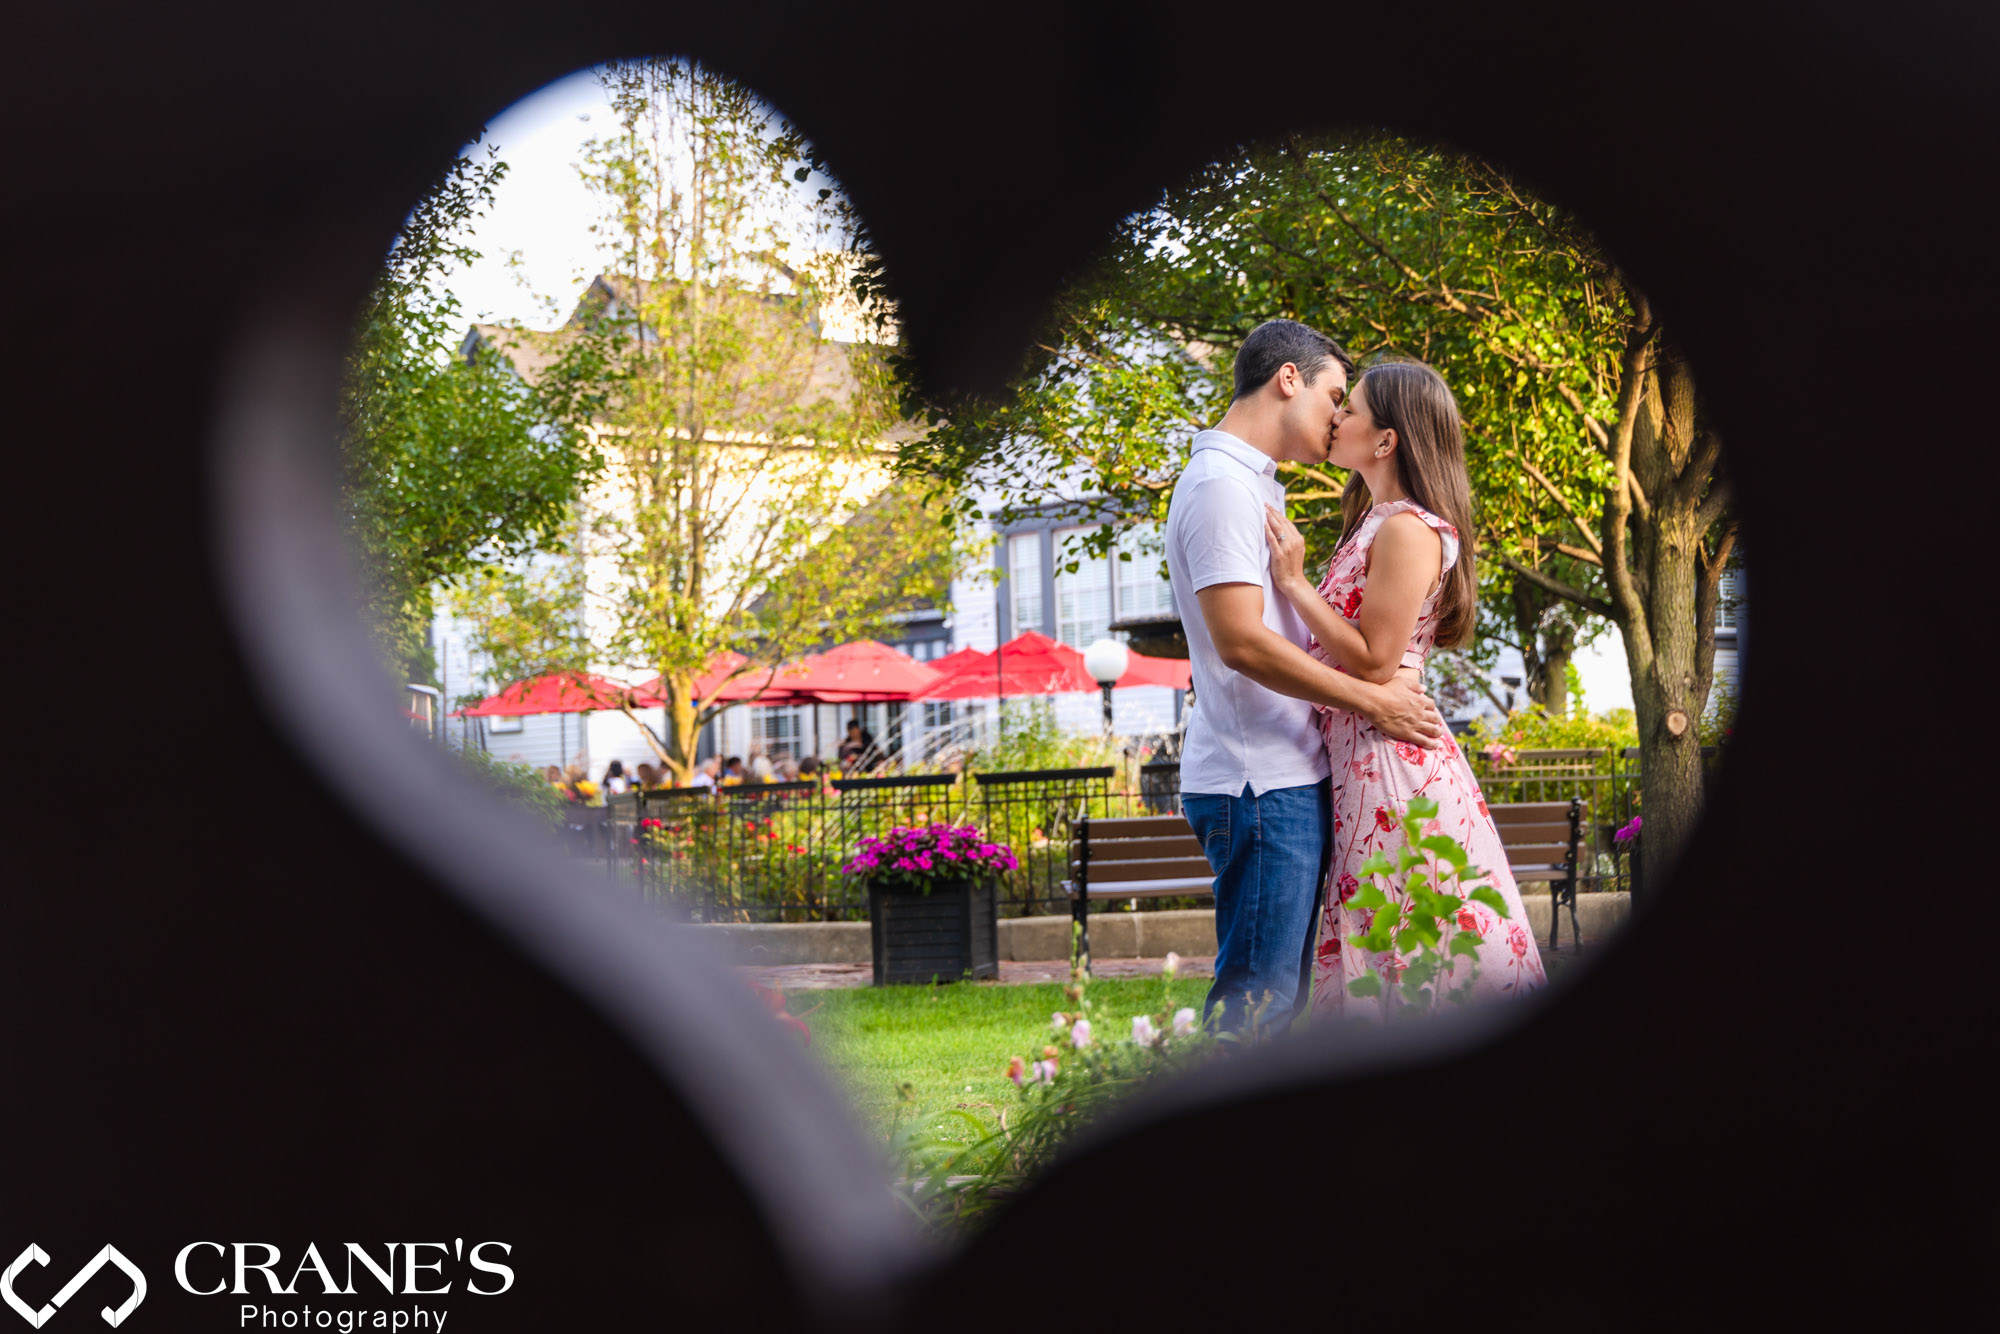 The hearts on the benches in downtown Long Grove offer a great photo opportunity for an engagement session,